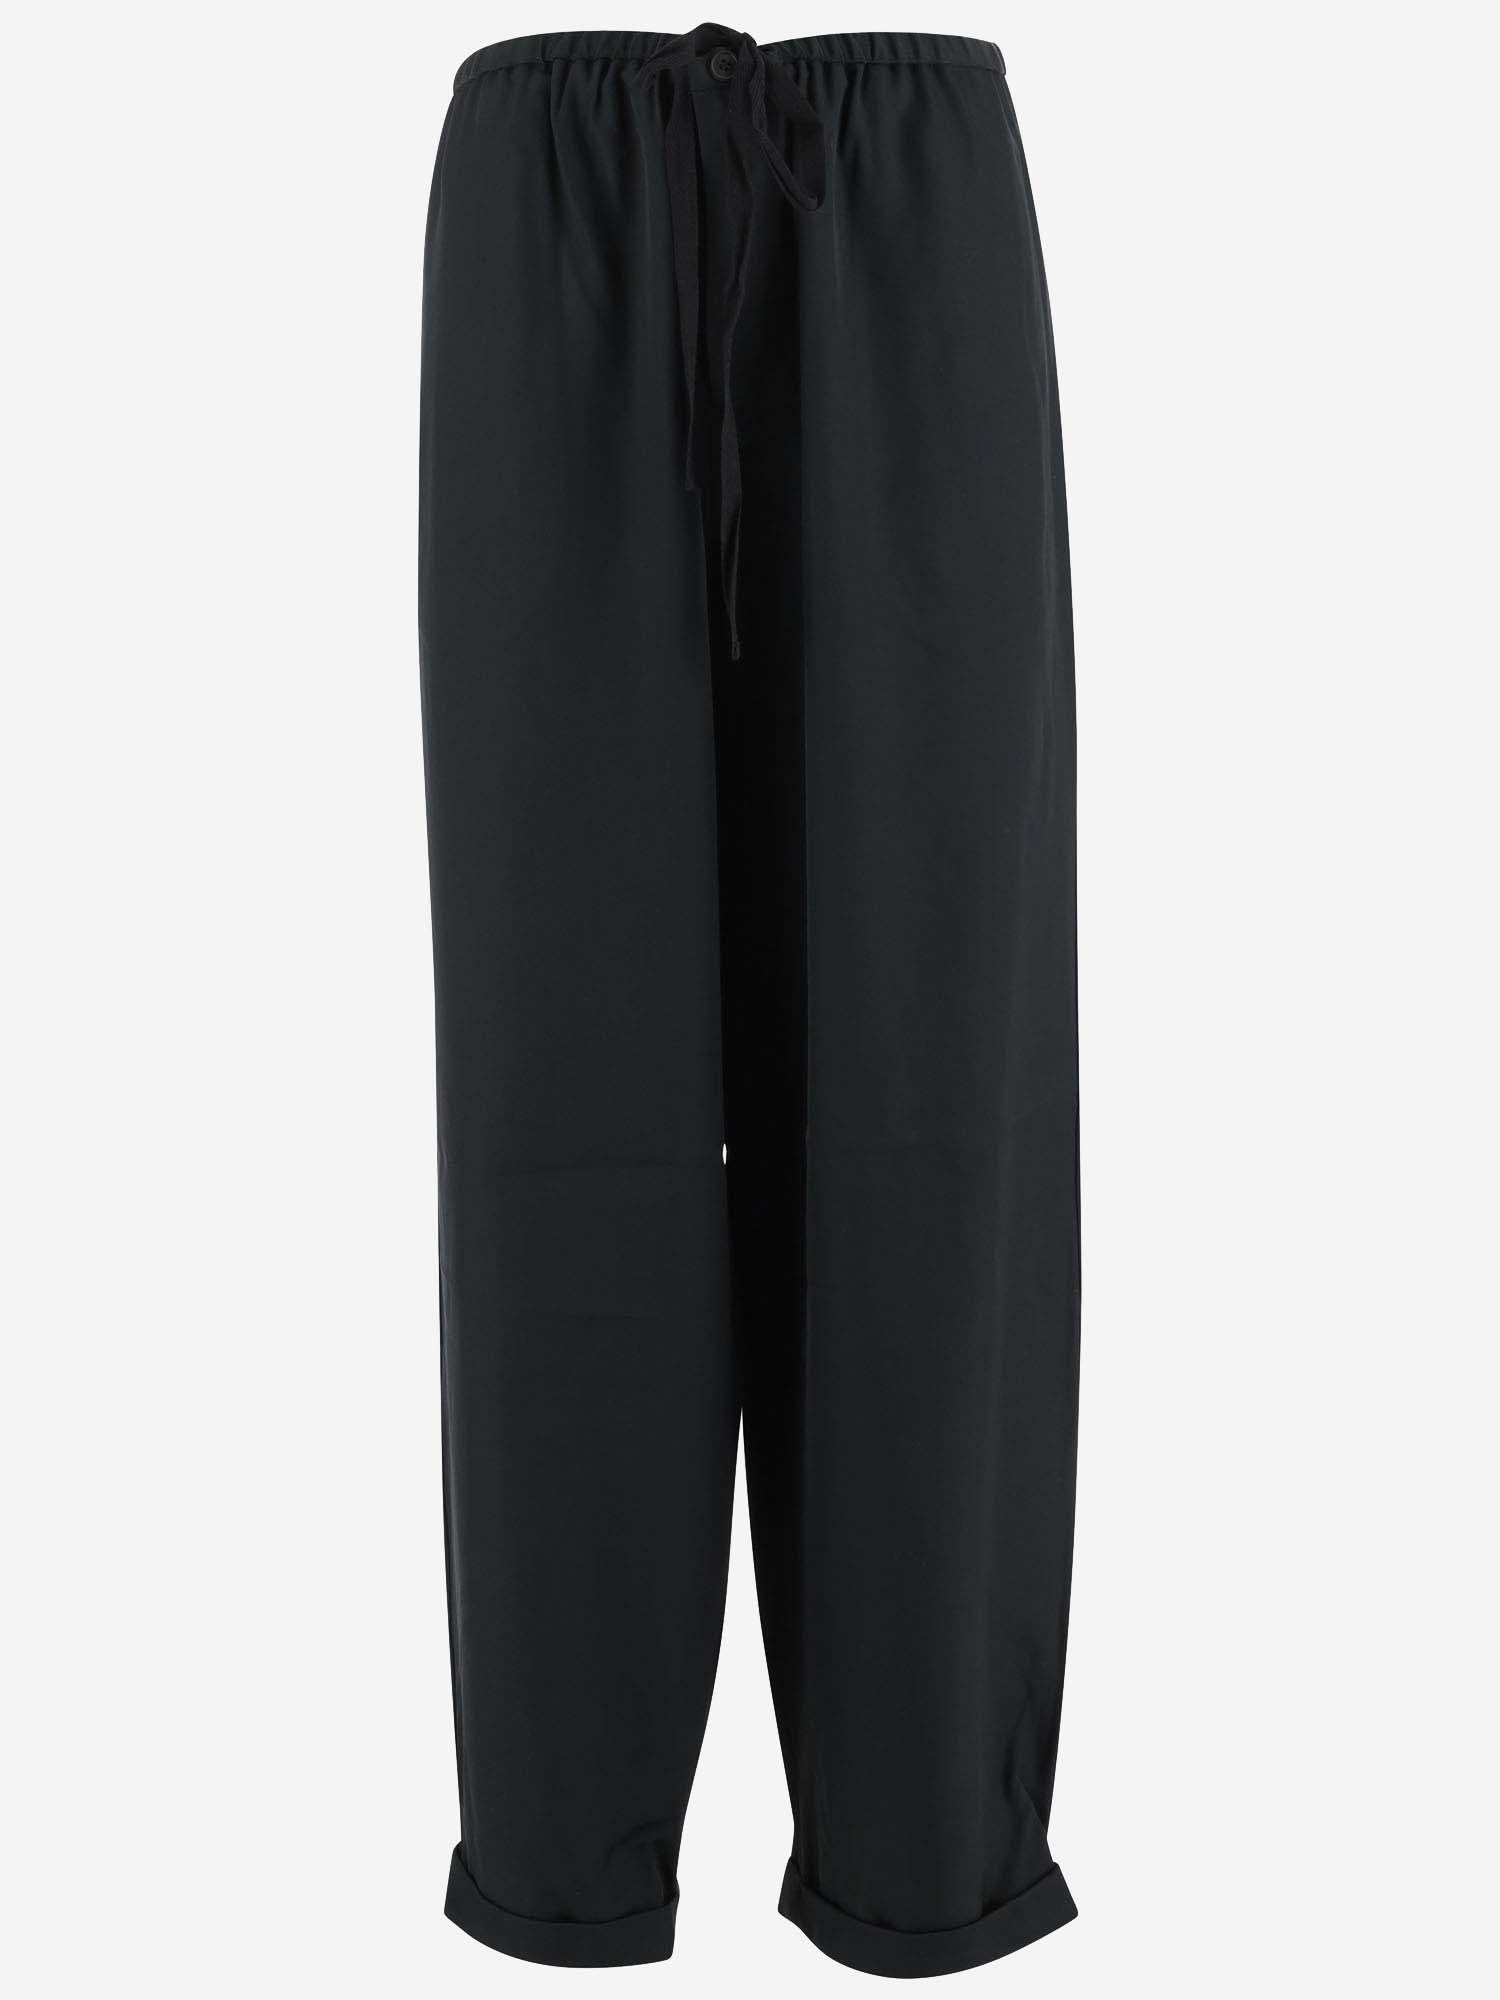 Joanni Synthetic Fabric Trousers